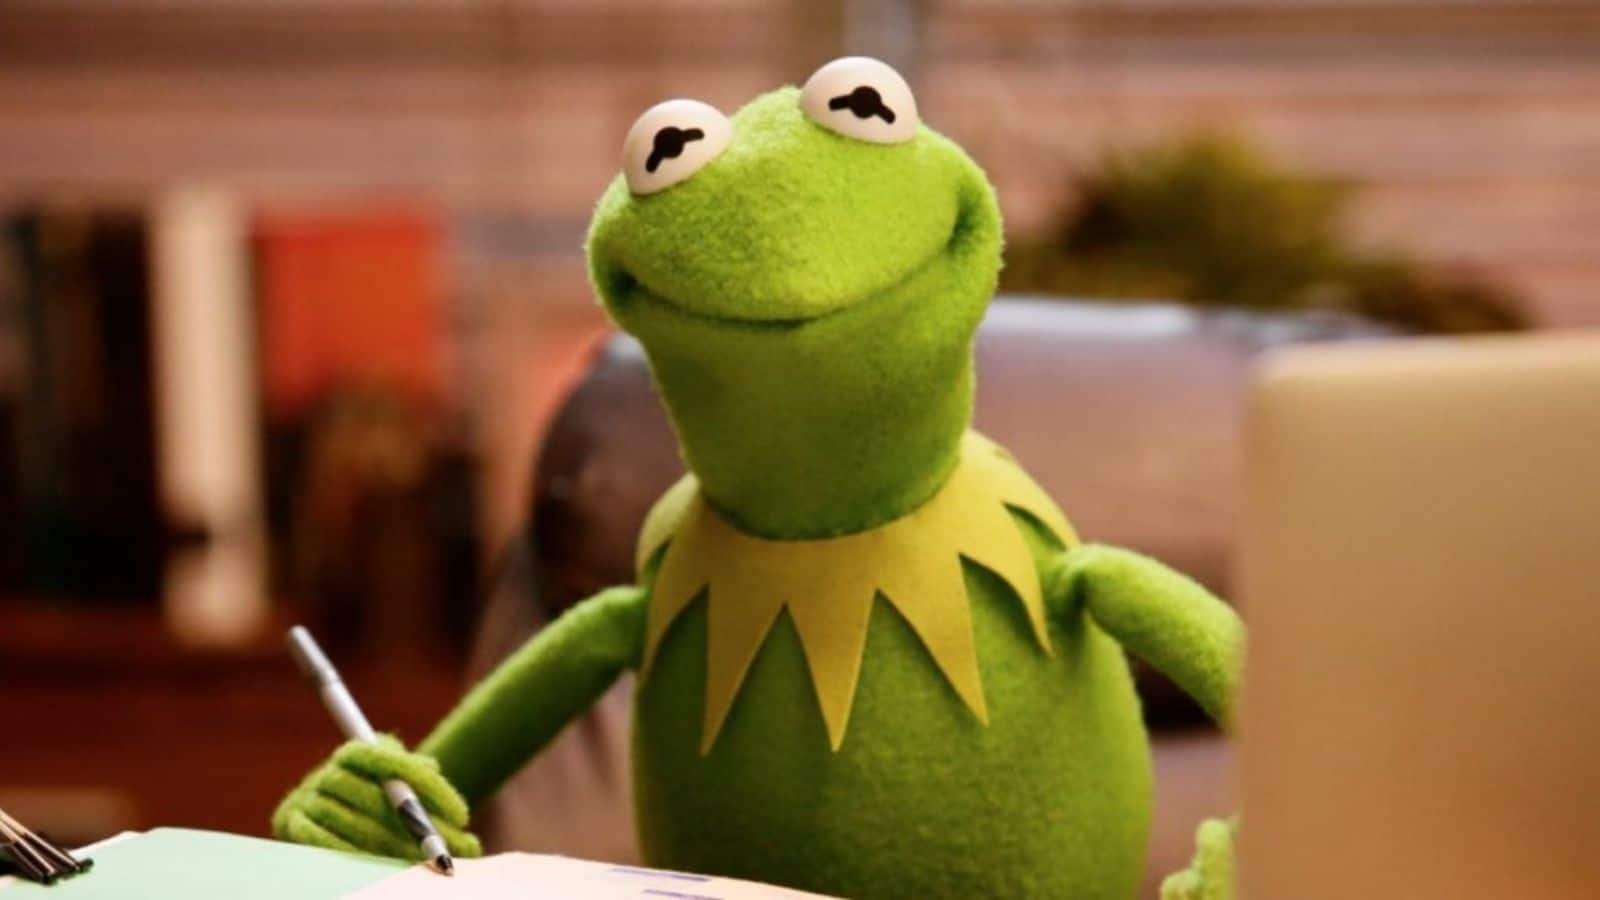 kermit the frog with pen header image